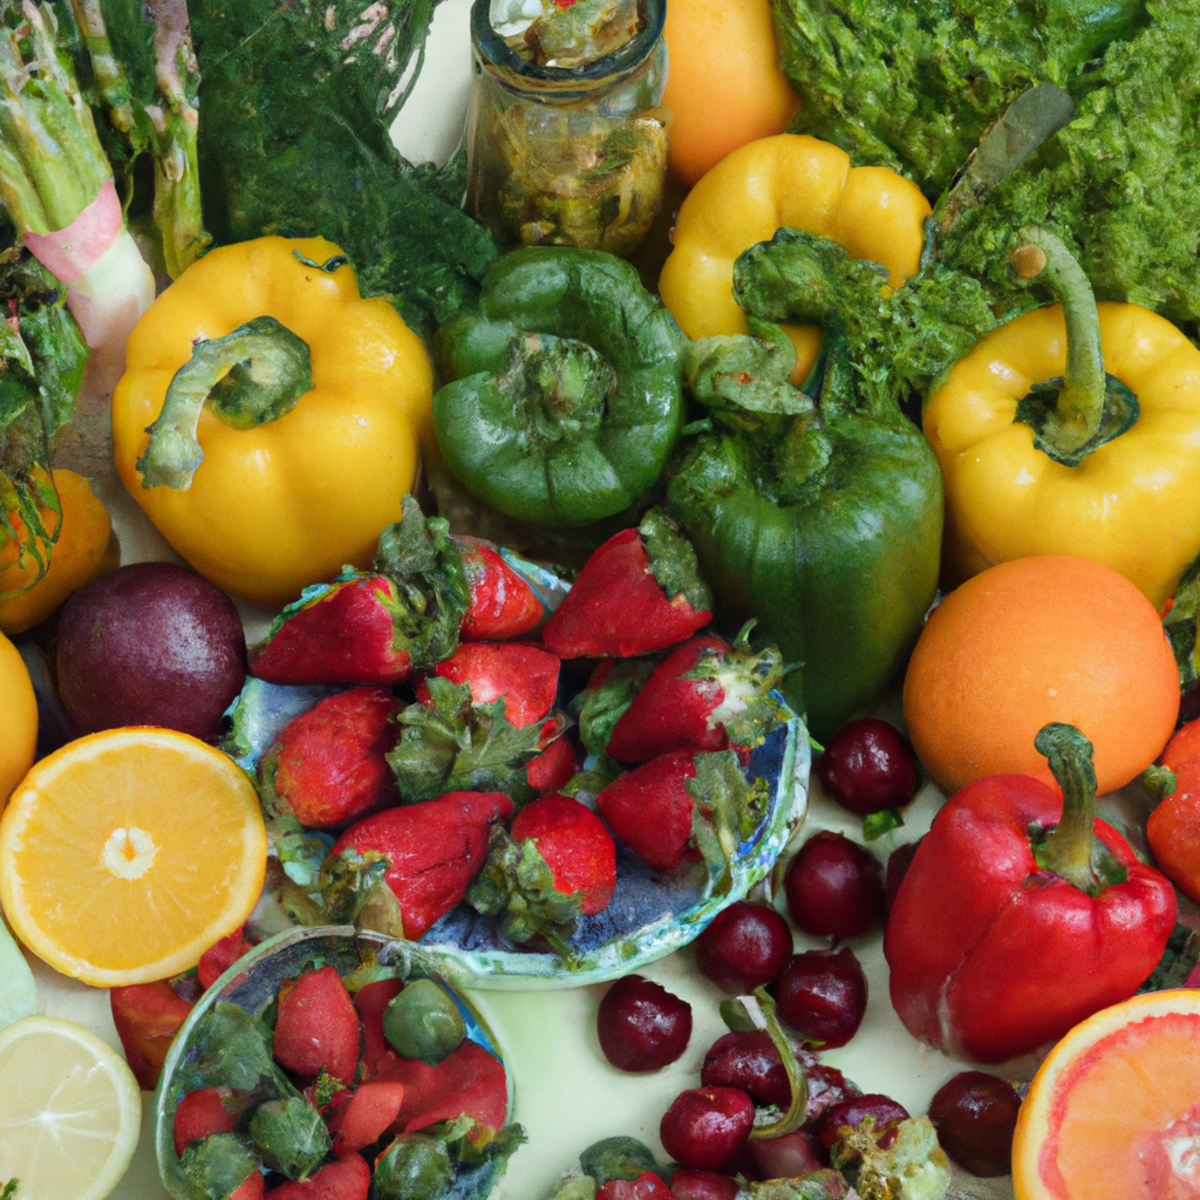 Vibrant display of anti-inflammatory diet: fruits, veggies, whole grains, healthy fats. Encourages rosacea management.